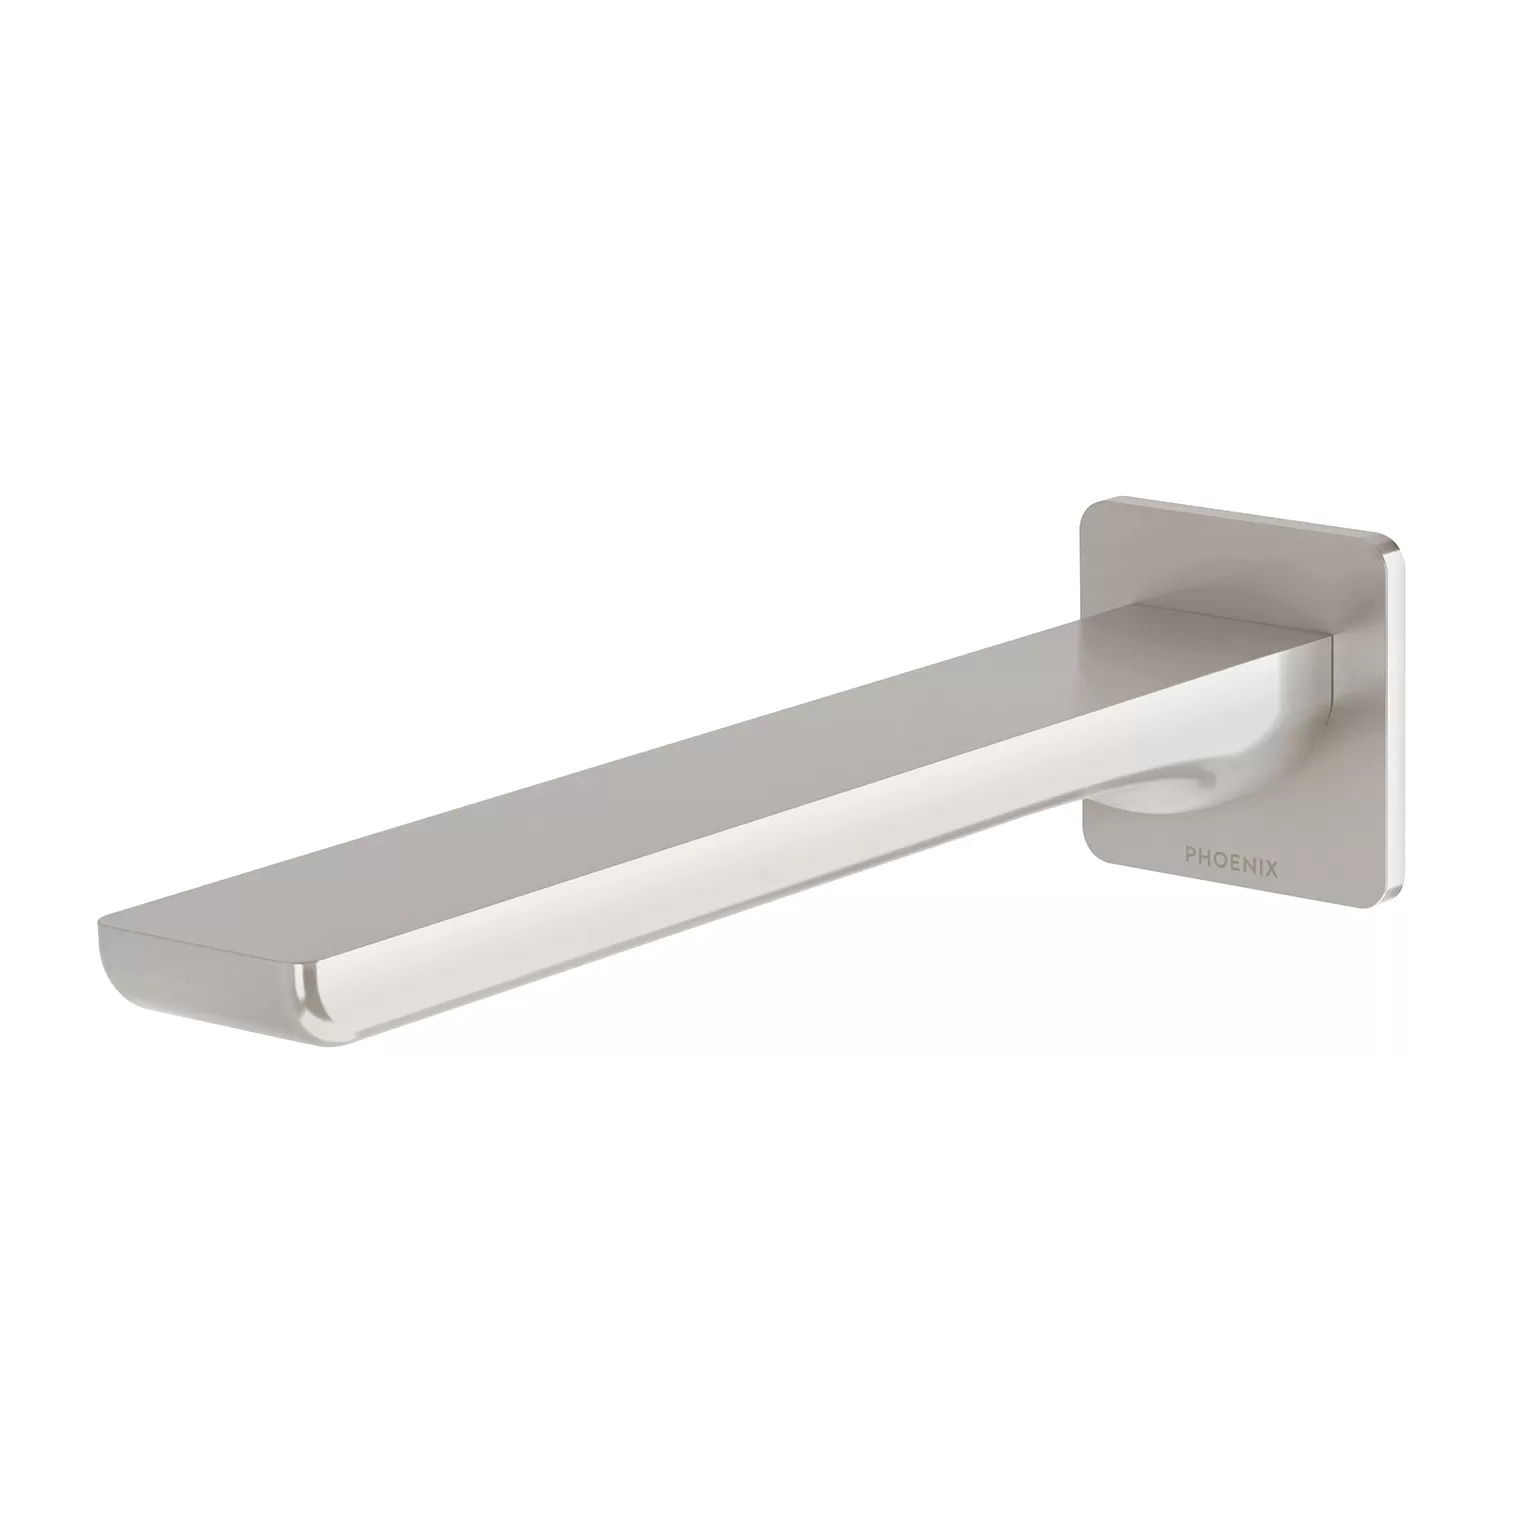 Phoenix Tapware Bathroom Wall Basin / Bath Outlet Spout Gloss MKII Brushed Nickel 135-7610-40